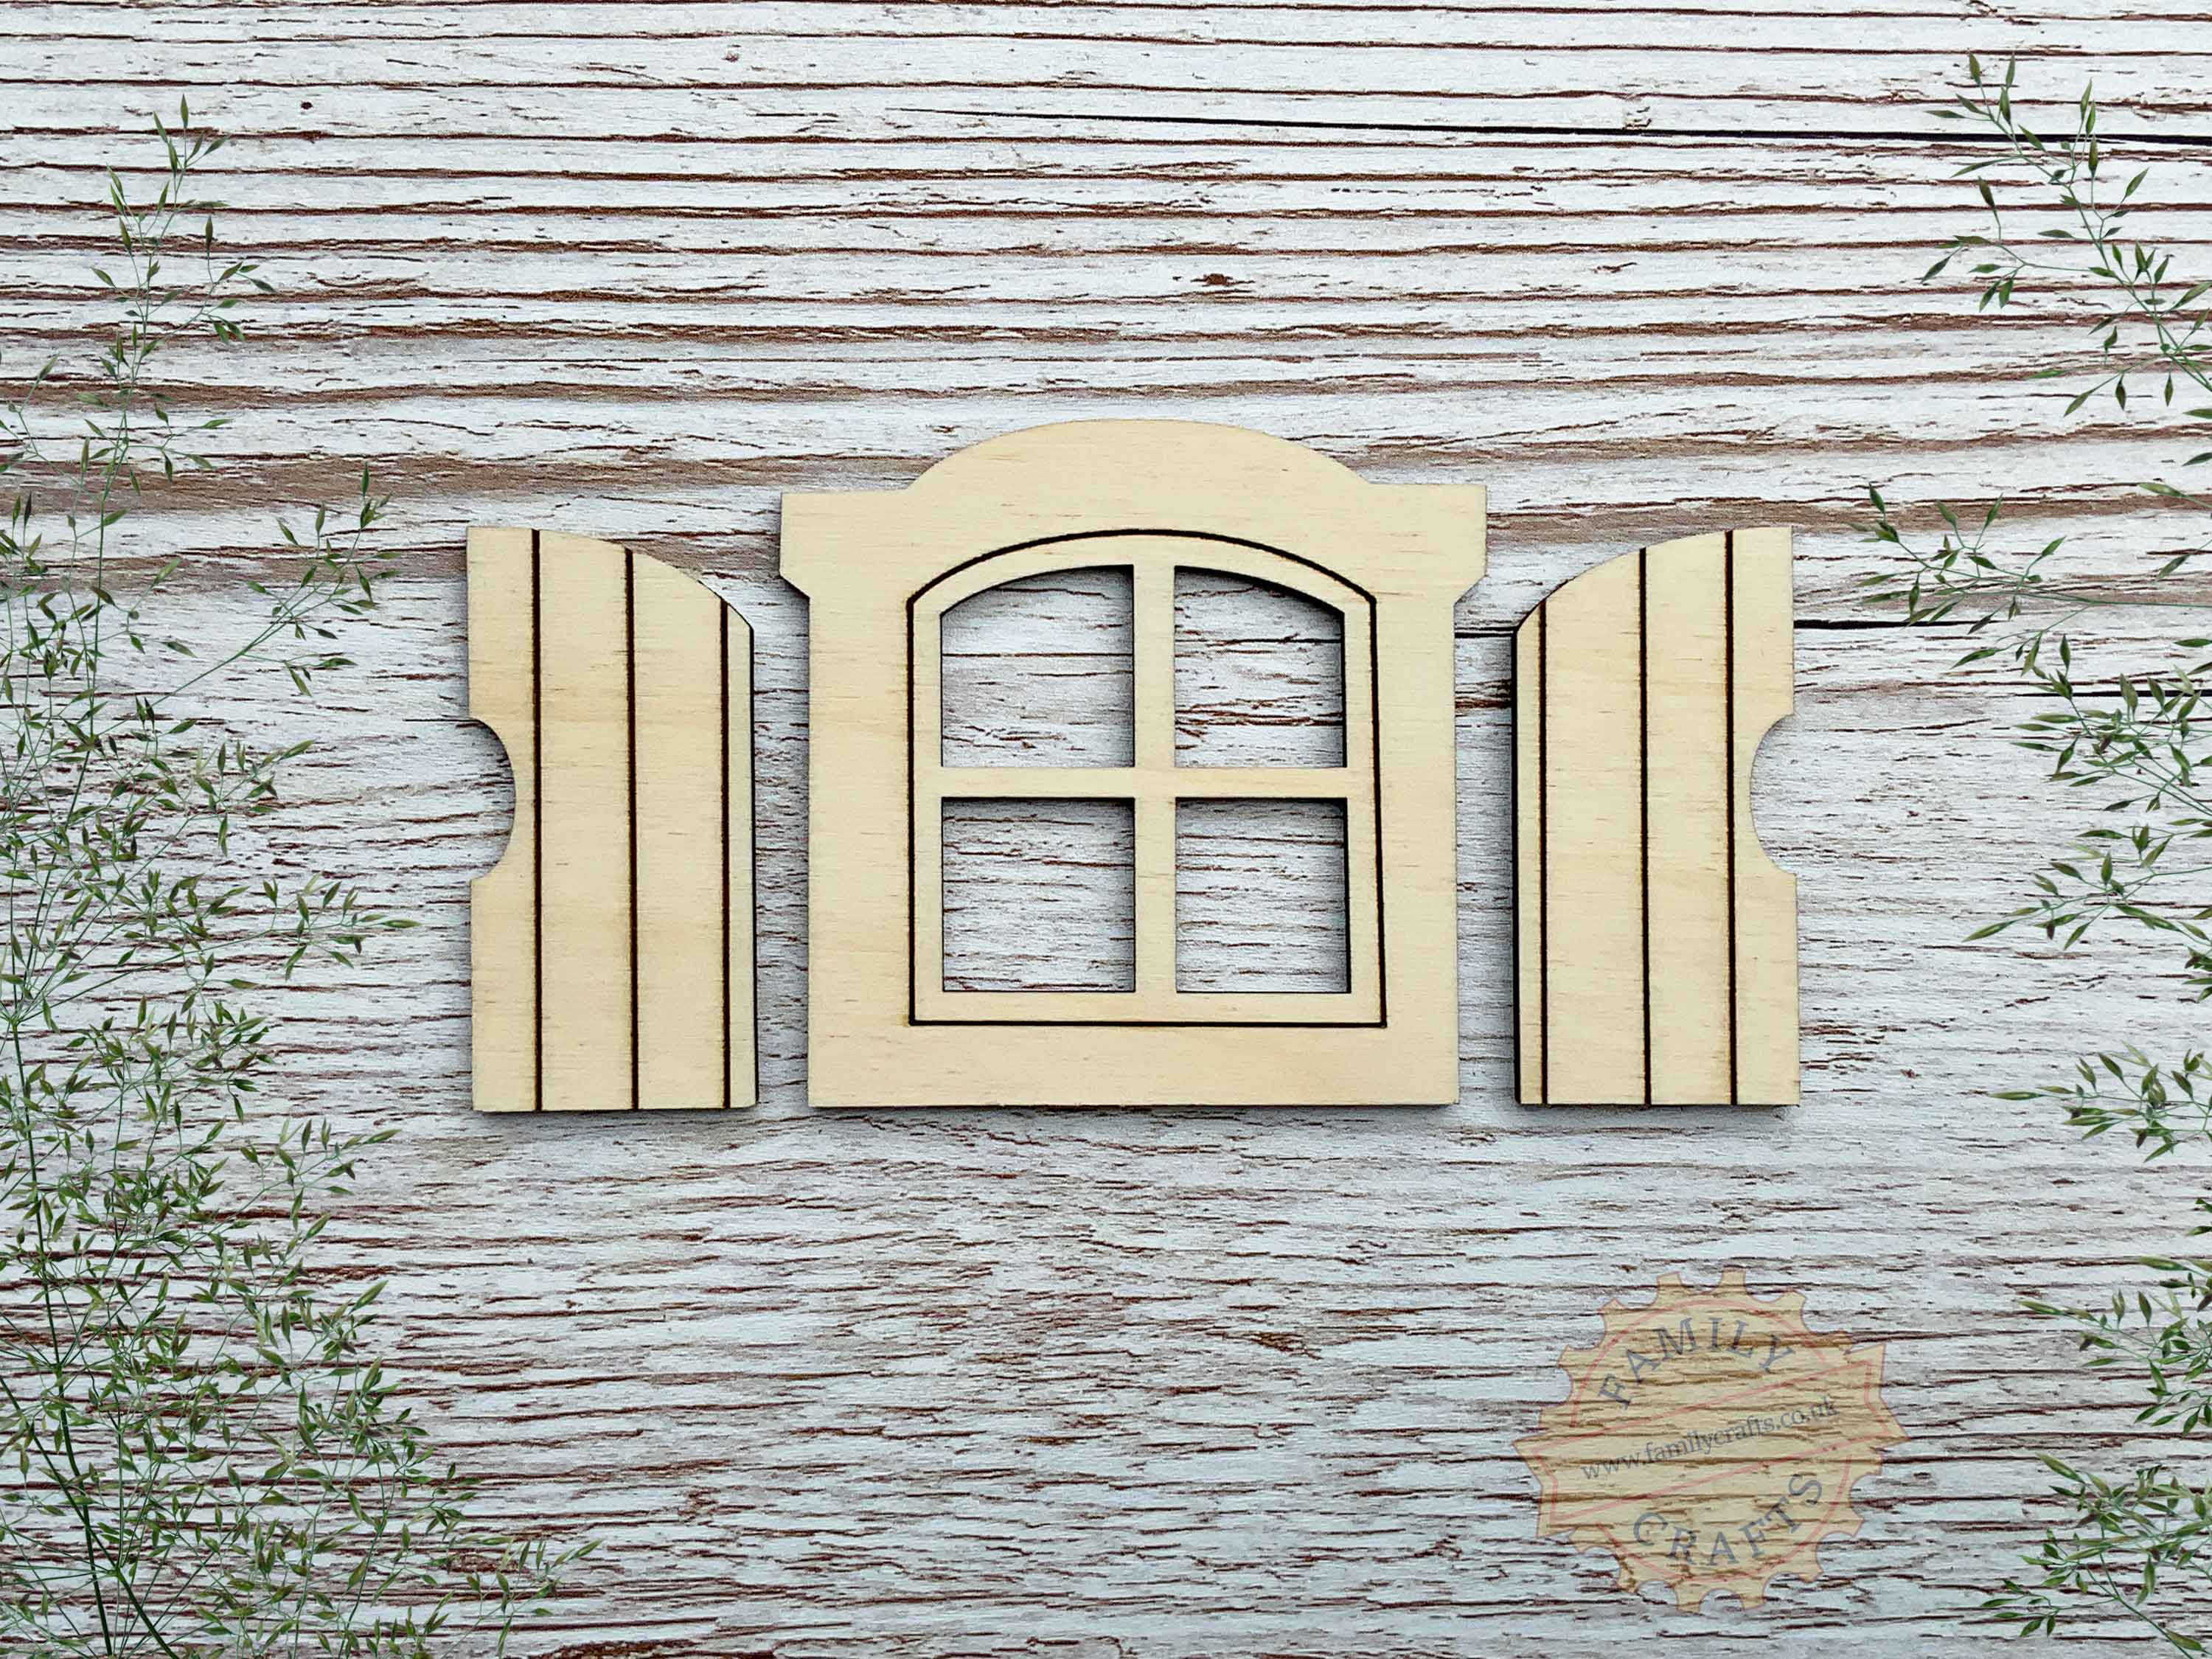 Enchanting Dolls House Windows with Shutters